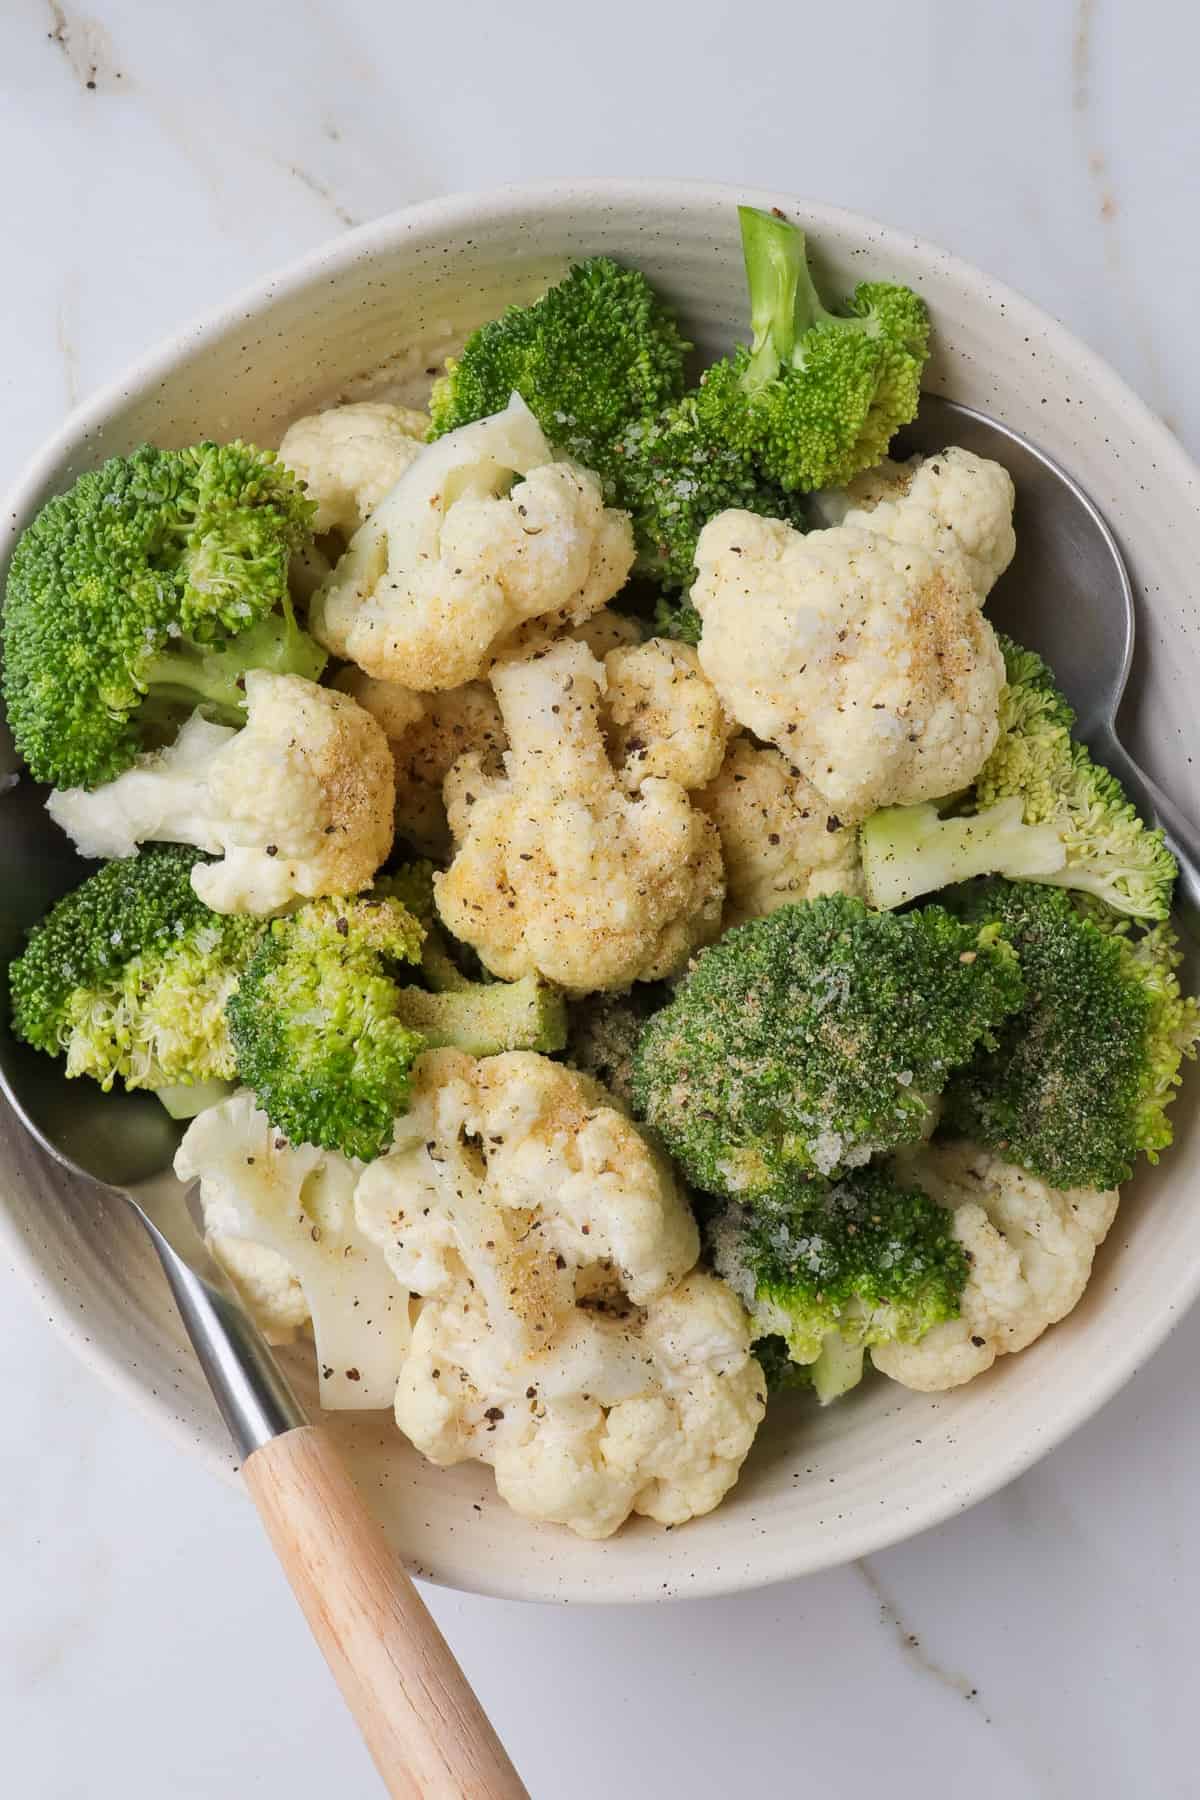 Raw broccoli and cauliflower florets in a bowl with seasonings and spoons.